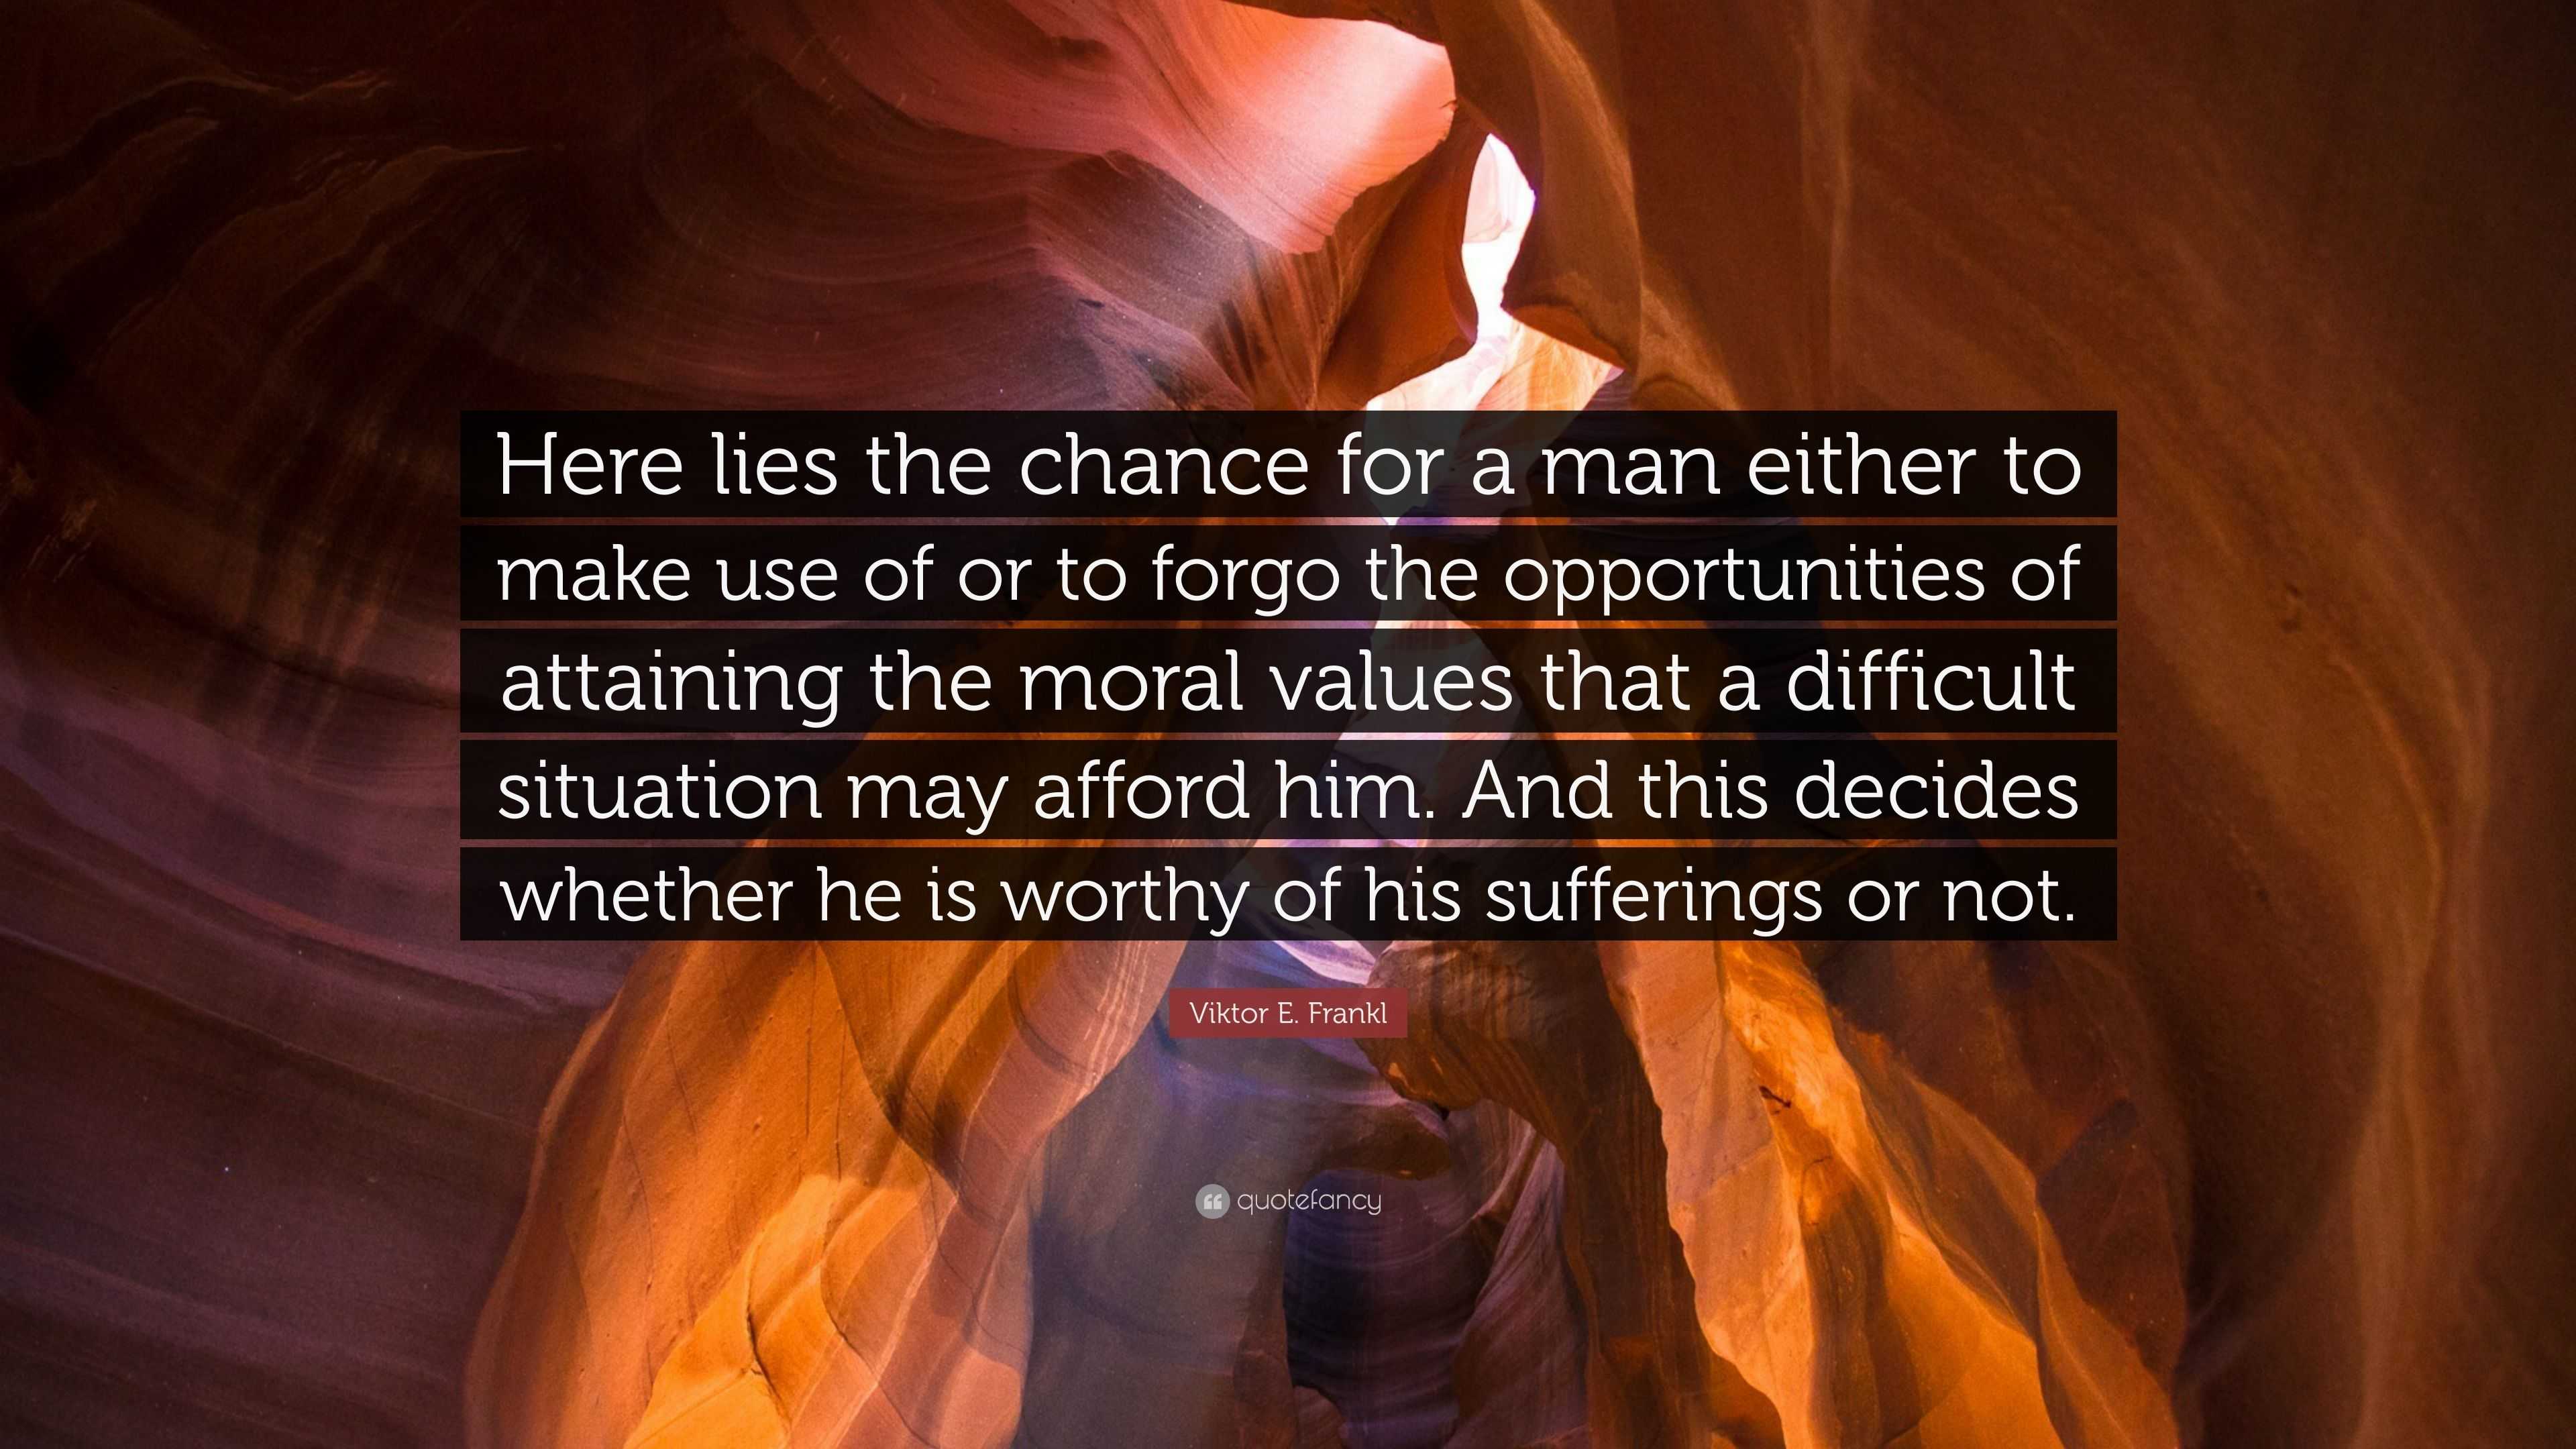 Viktor E. Frankl Quote: “Here lies the chance for a man either to make ...